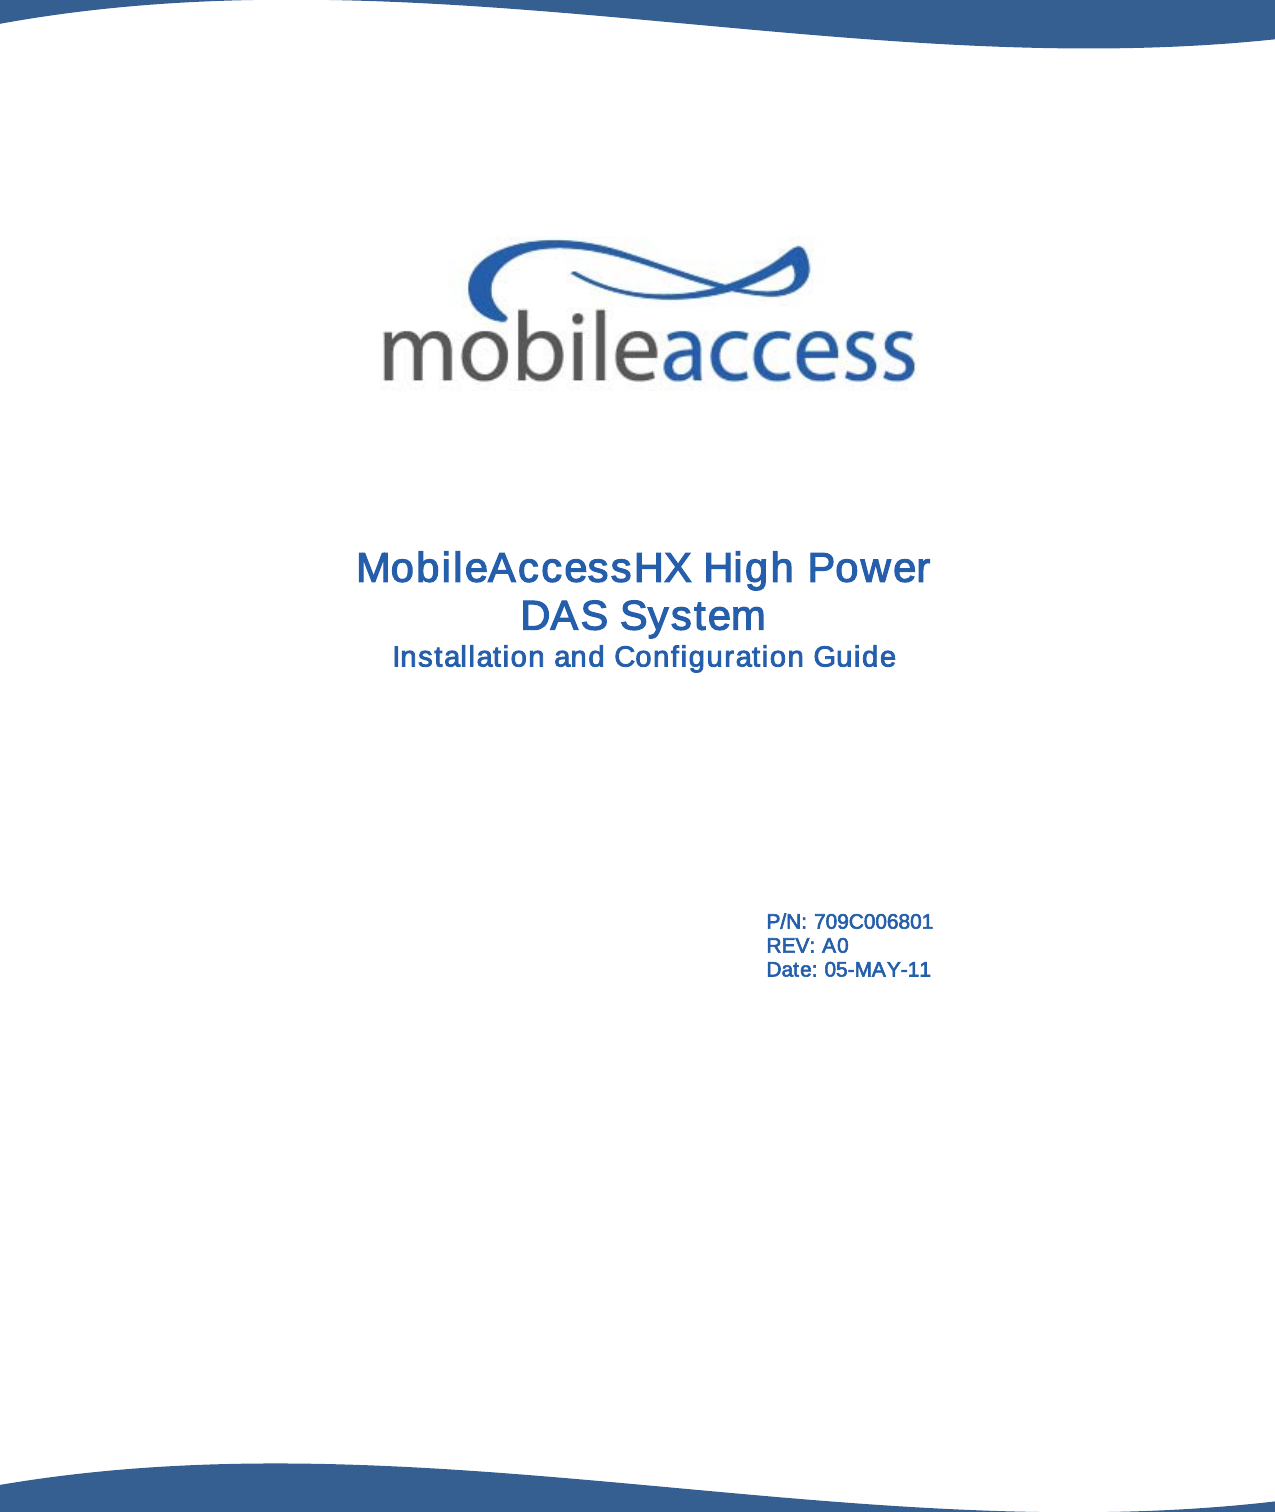                                                  MobileAccessHX High Power DAS System Installation and Configuration Guide P/N: 709C006801 REV: A0 Date: 05-MAY-11  